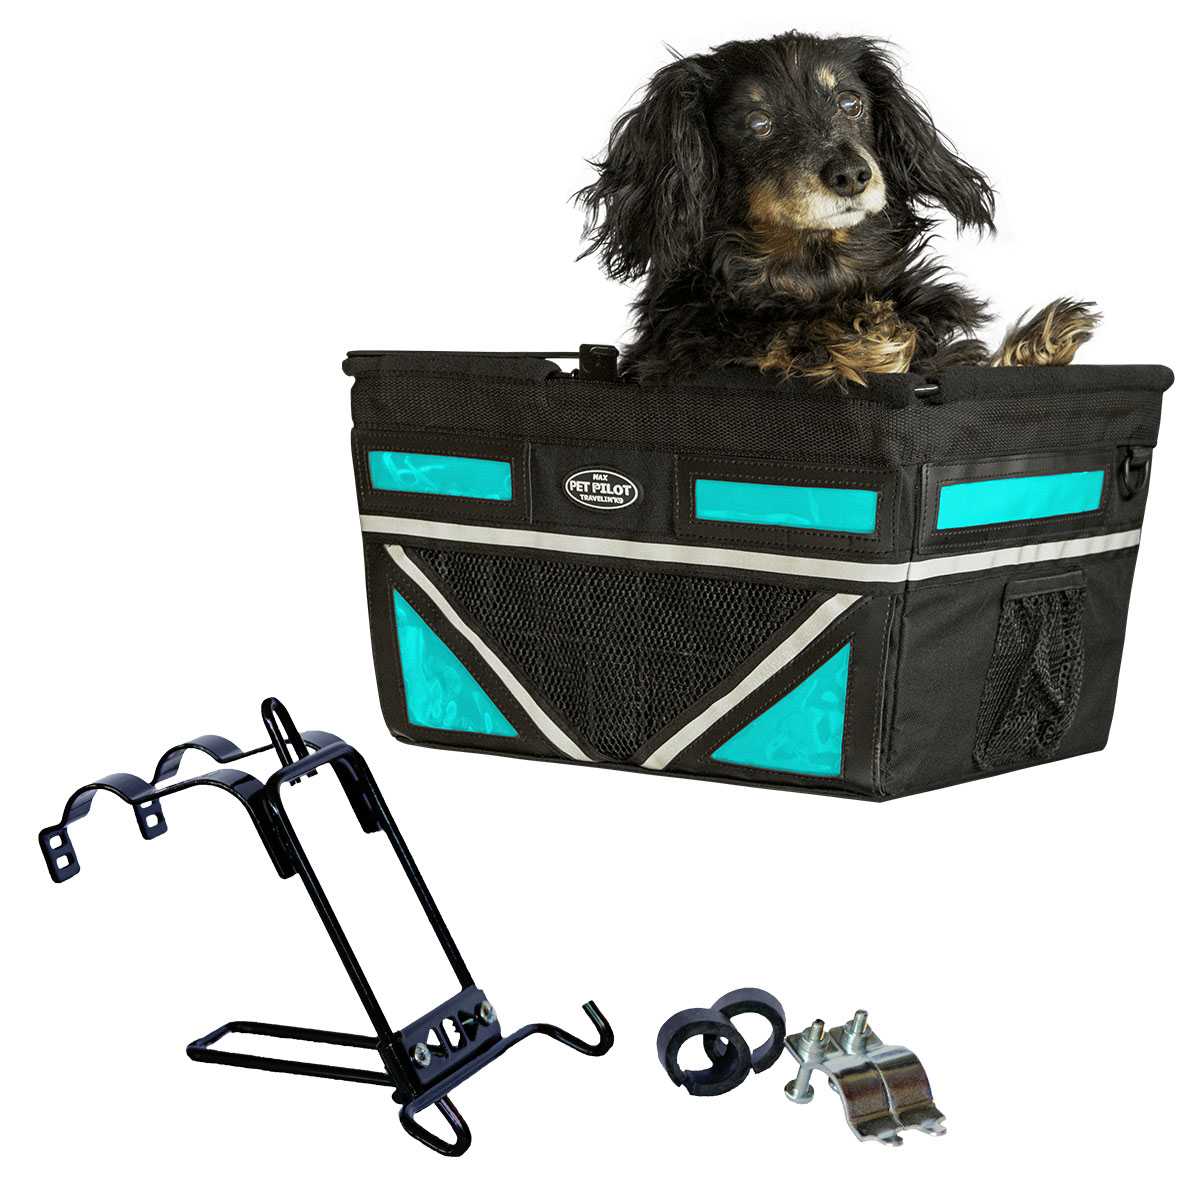 Ptx-8212 Max Dog Bicycle Basket Carrier, Turquoise